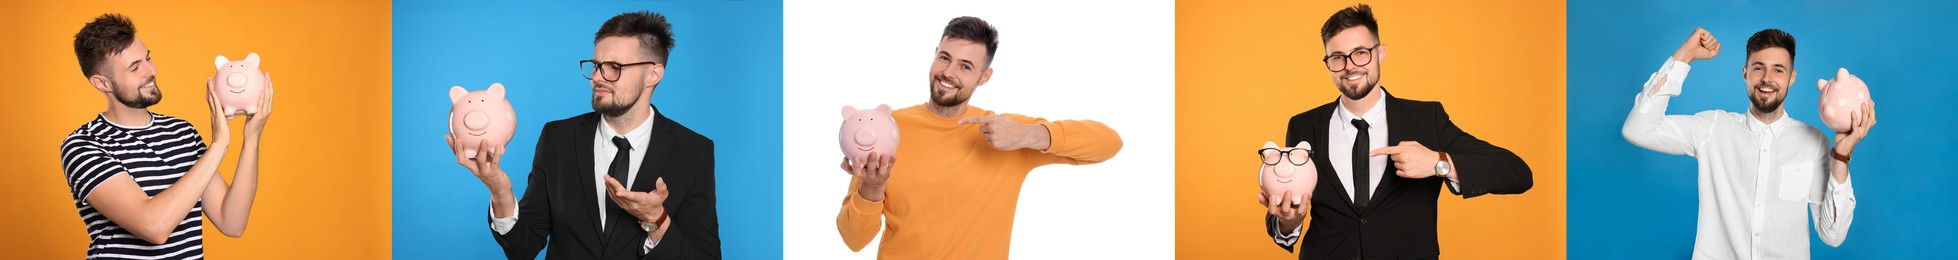 Collage with photos of man holding ceramic piggy banks on different color backgrounds. Banner design